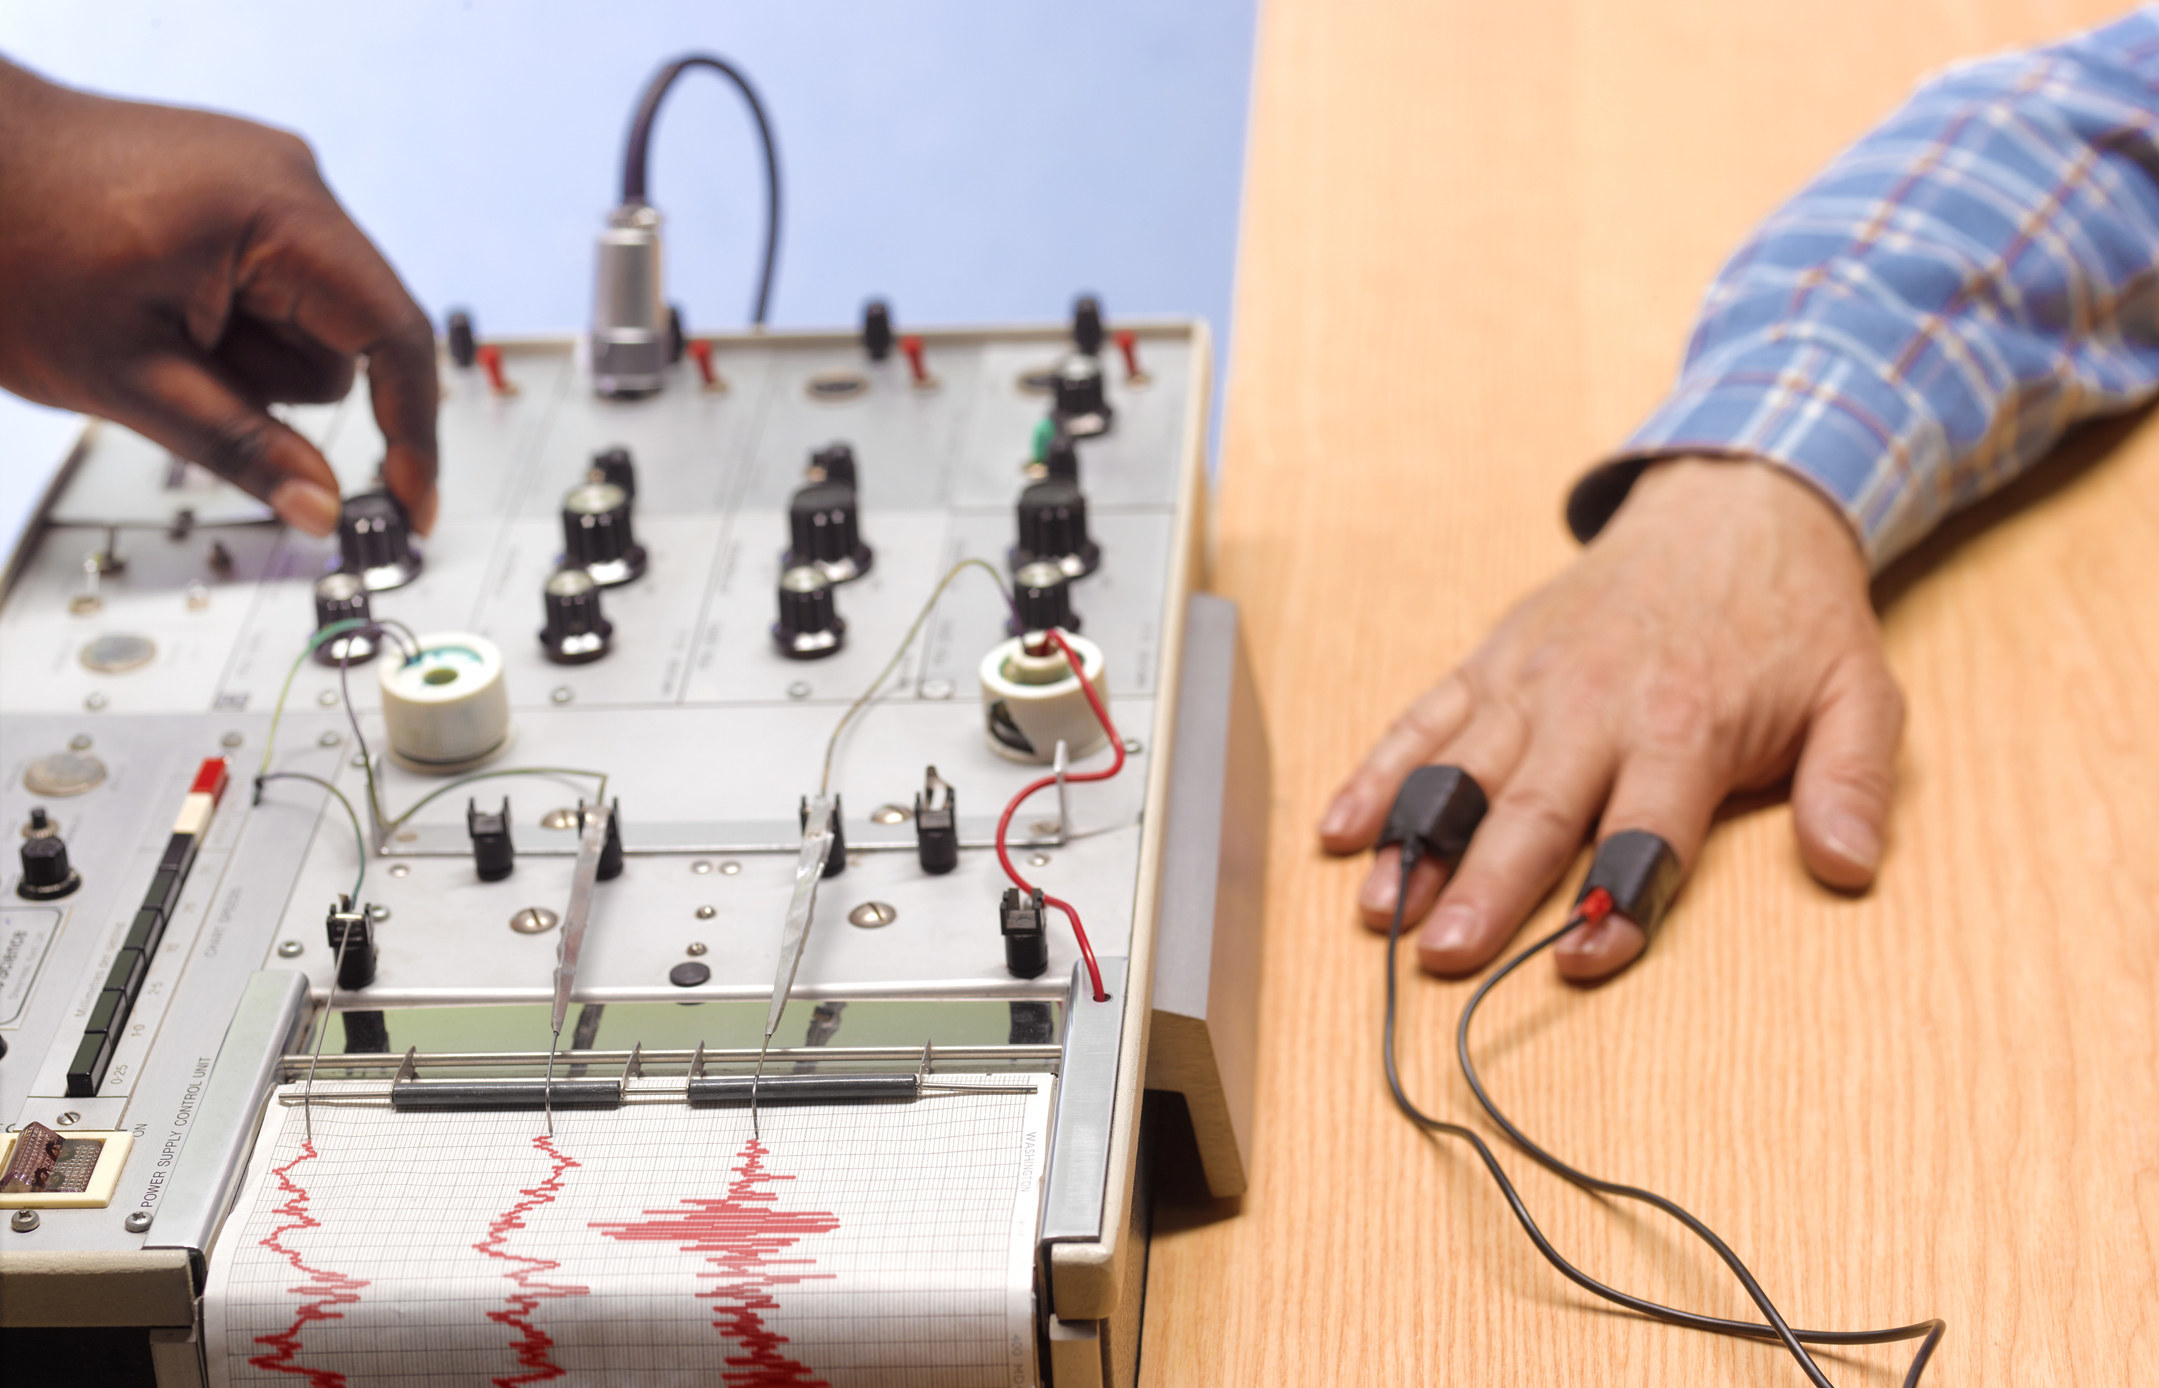 A polygraph test with a hand on one knob across from a man&#x27;s hand on the table connected by sensors on index and ring fingers